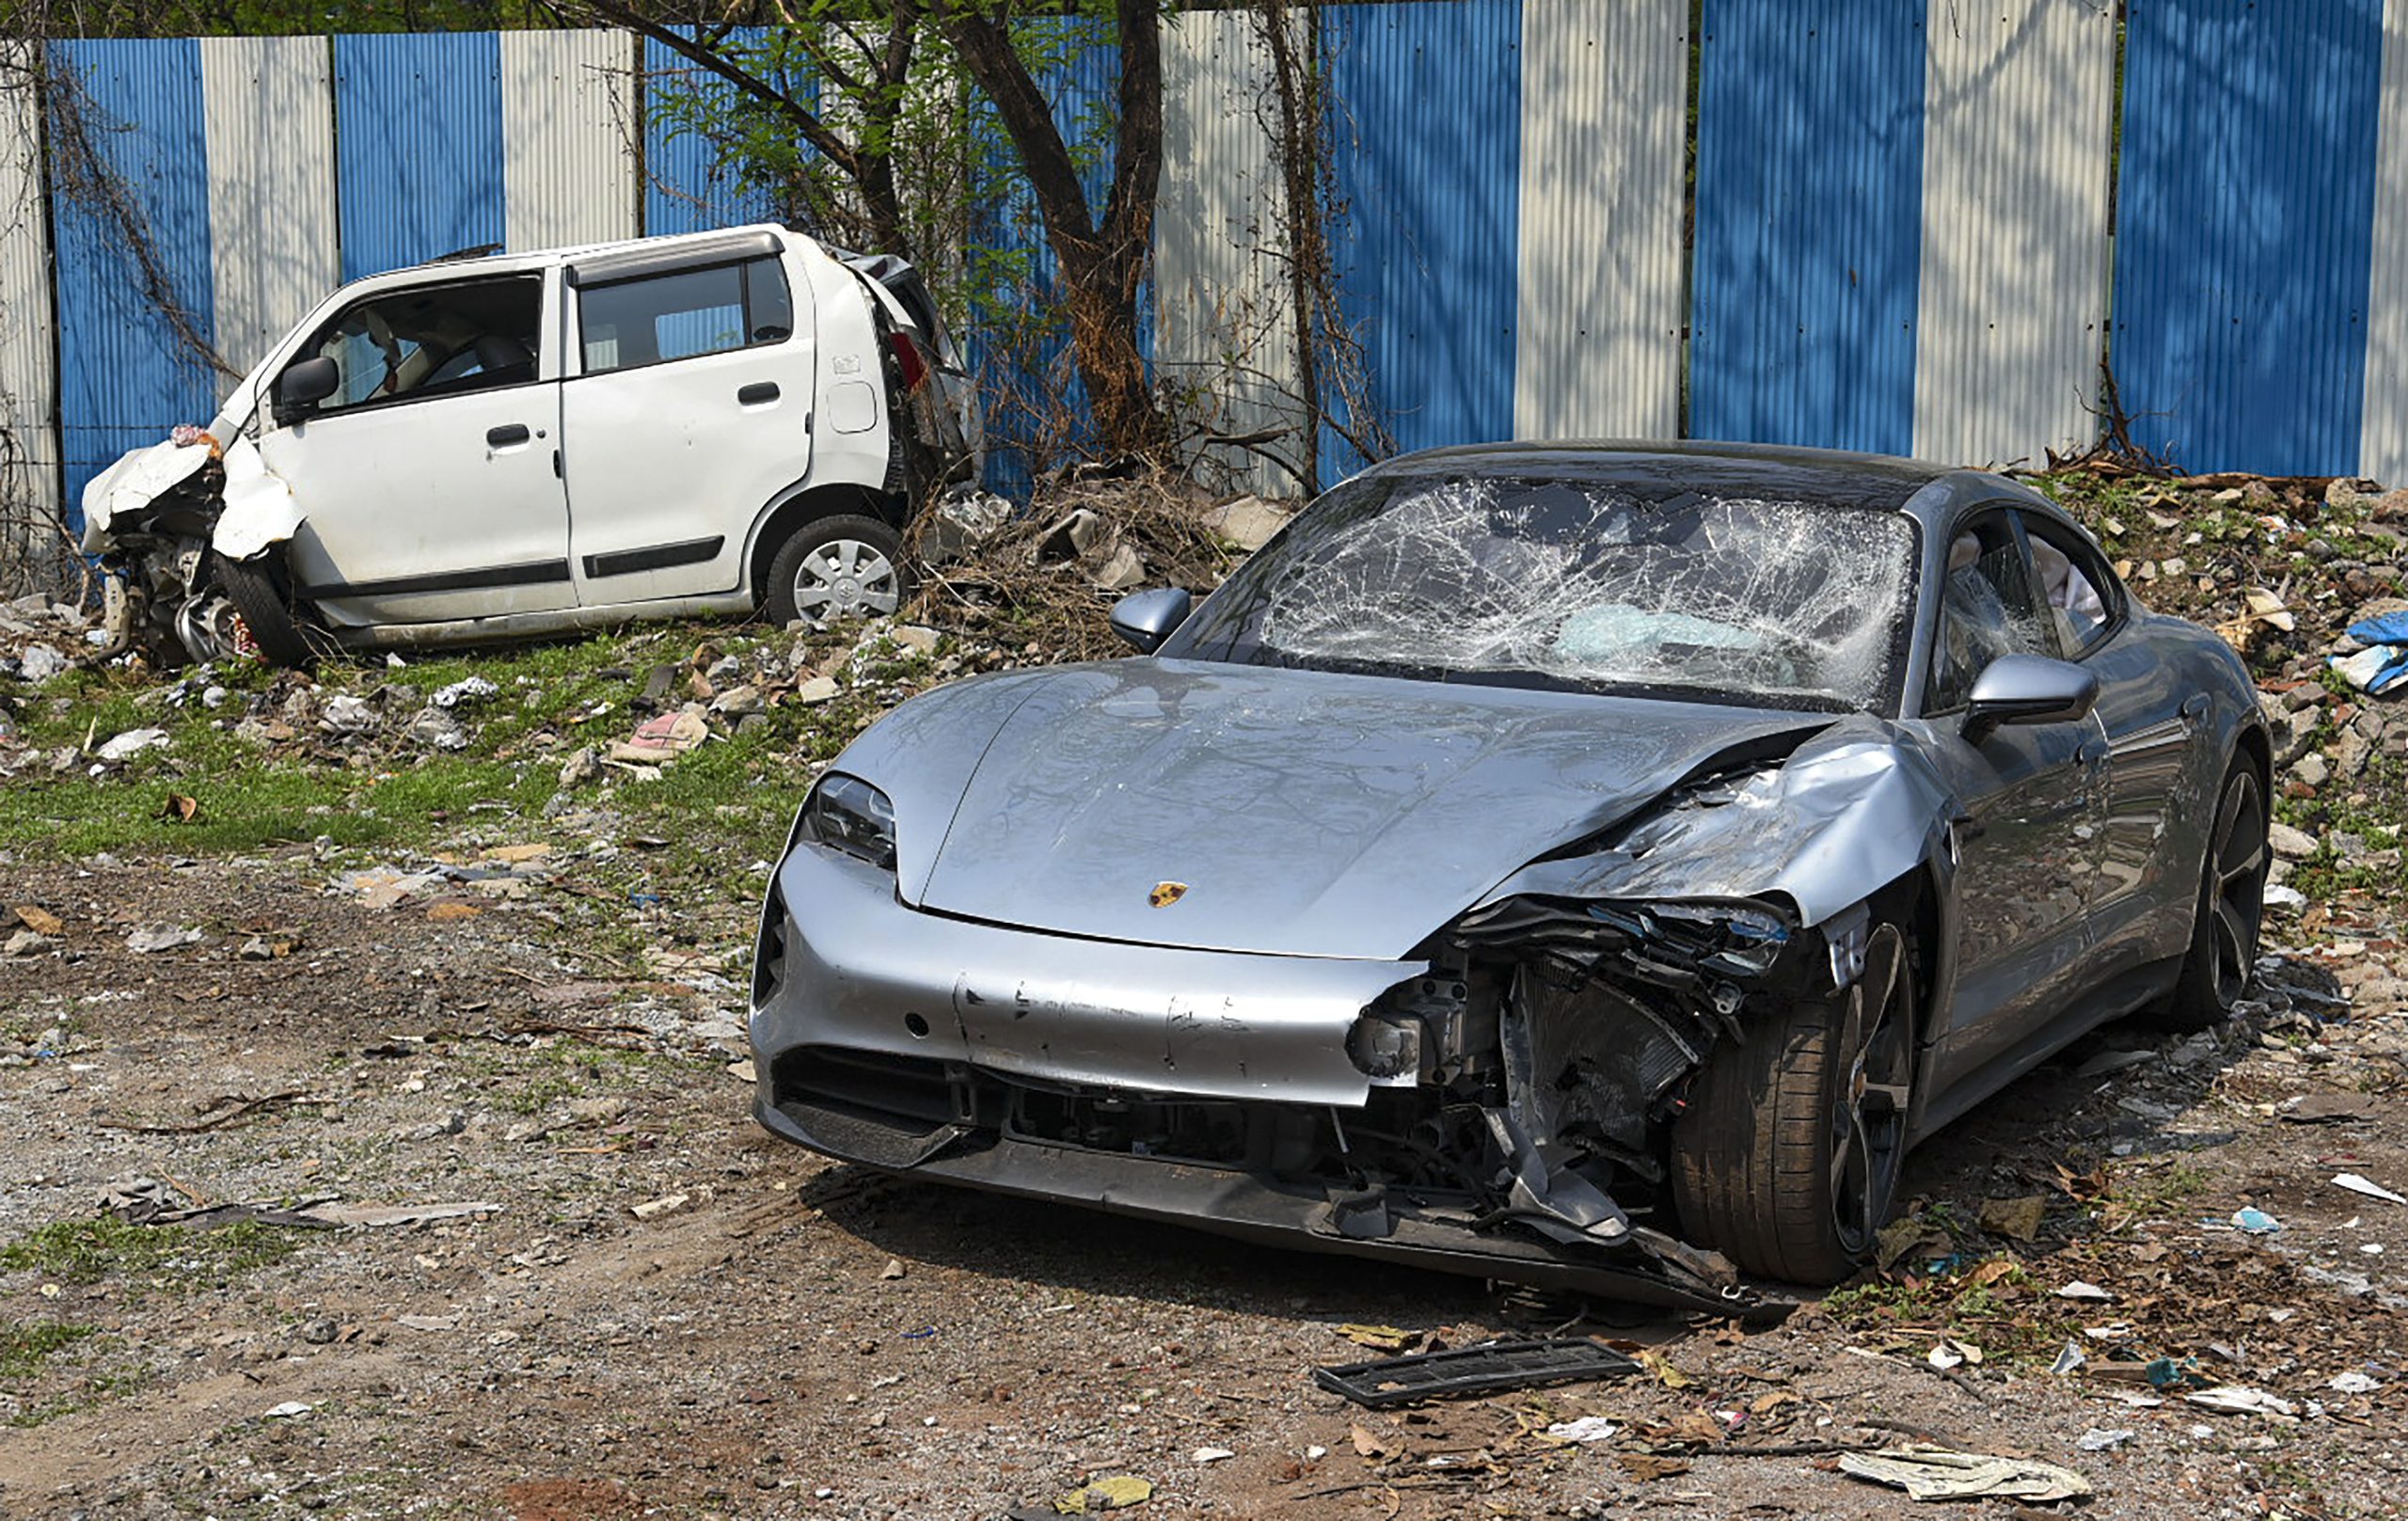 Read more about the article Amid Porsche Crash Probe, Builder Family's Chhota Rajan Link Under Lens